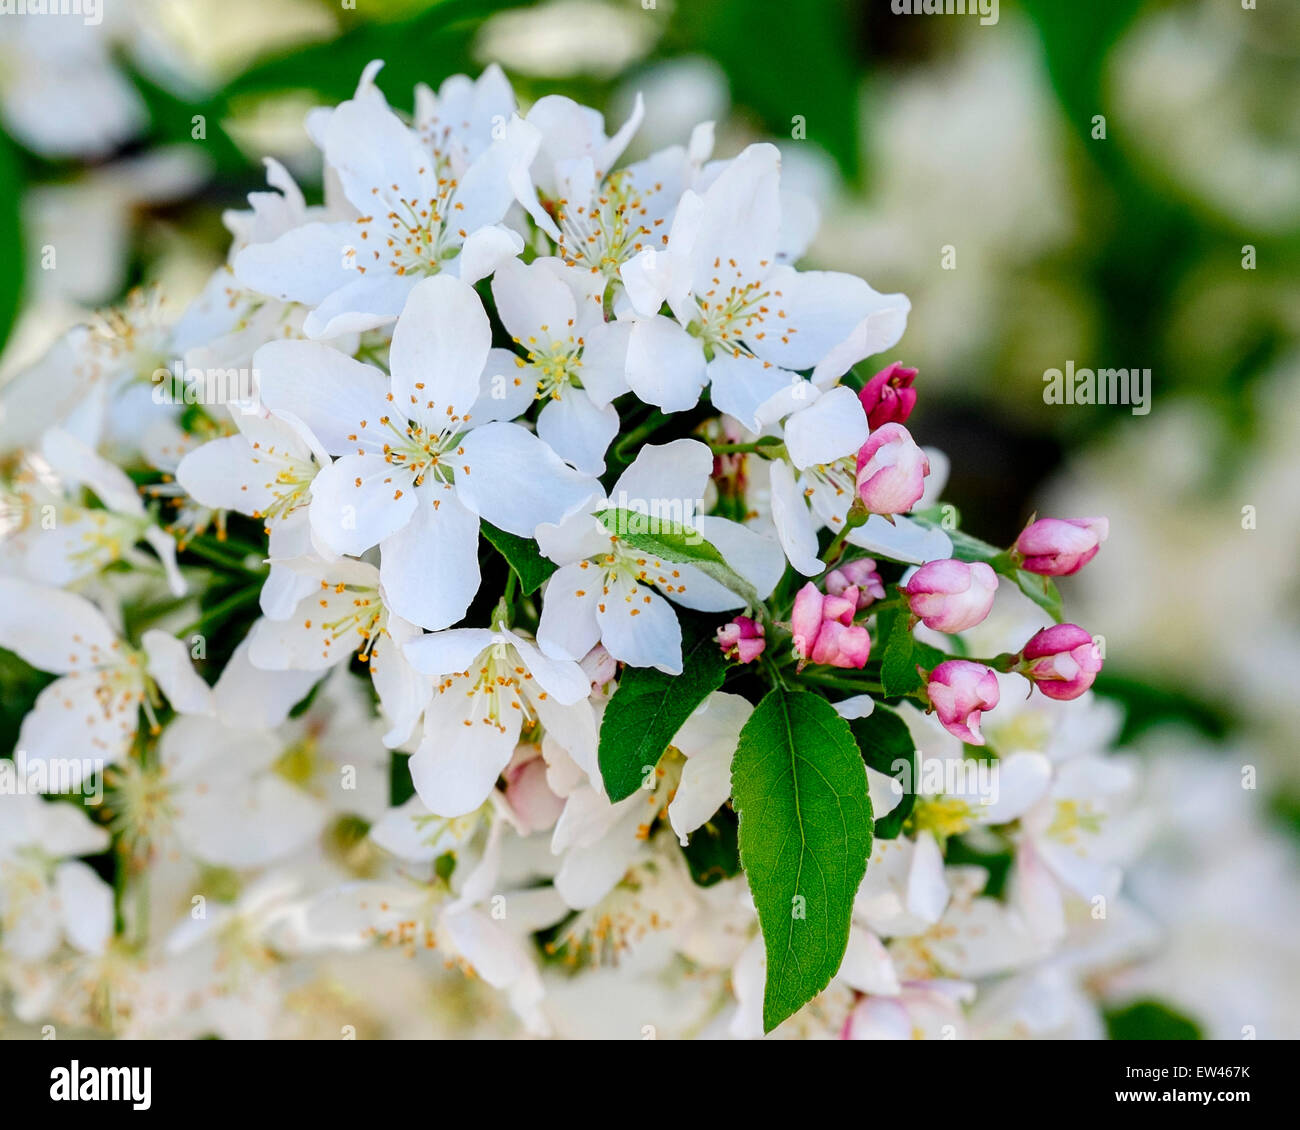 A cluster of blossoms and buds on a crabapple tree in the spring. USA Stock Photo